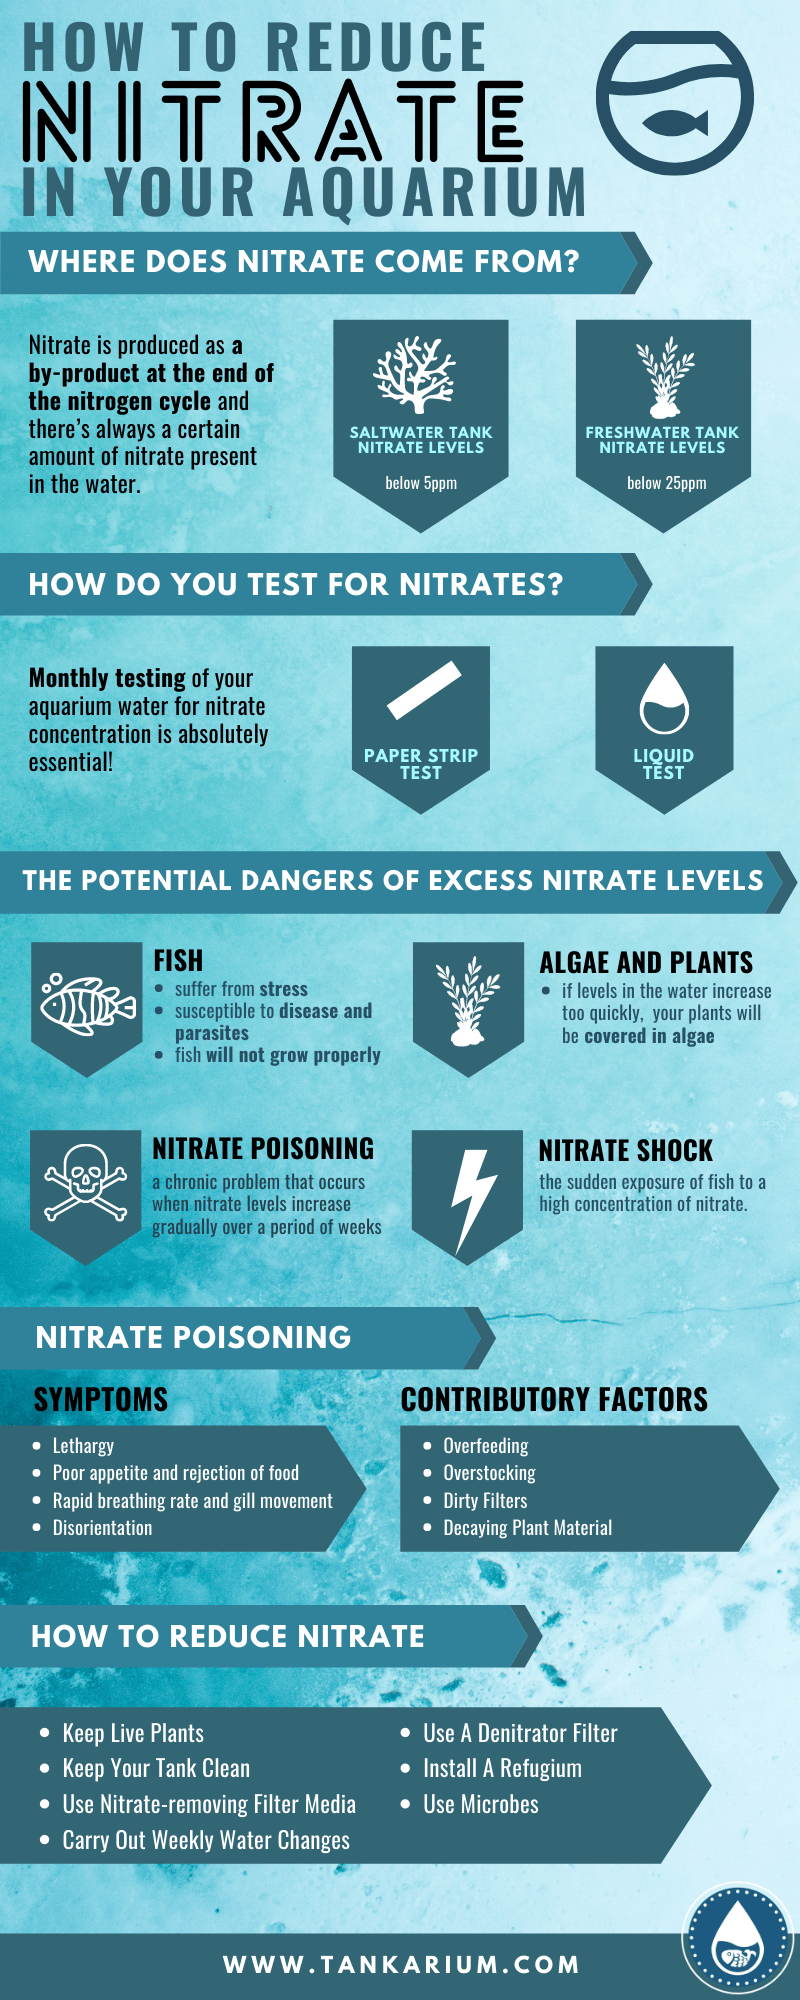 How To Reduce Nitrate In Your Aquarium - Infographic